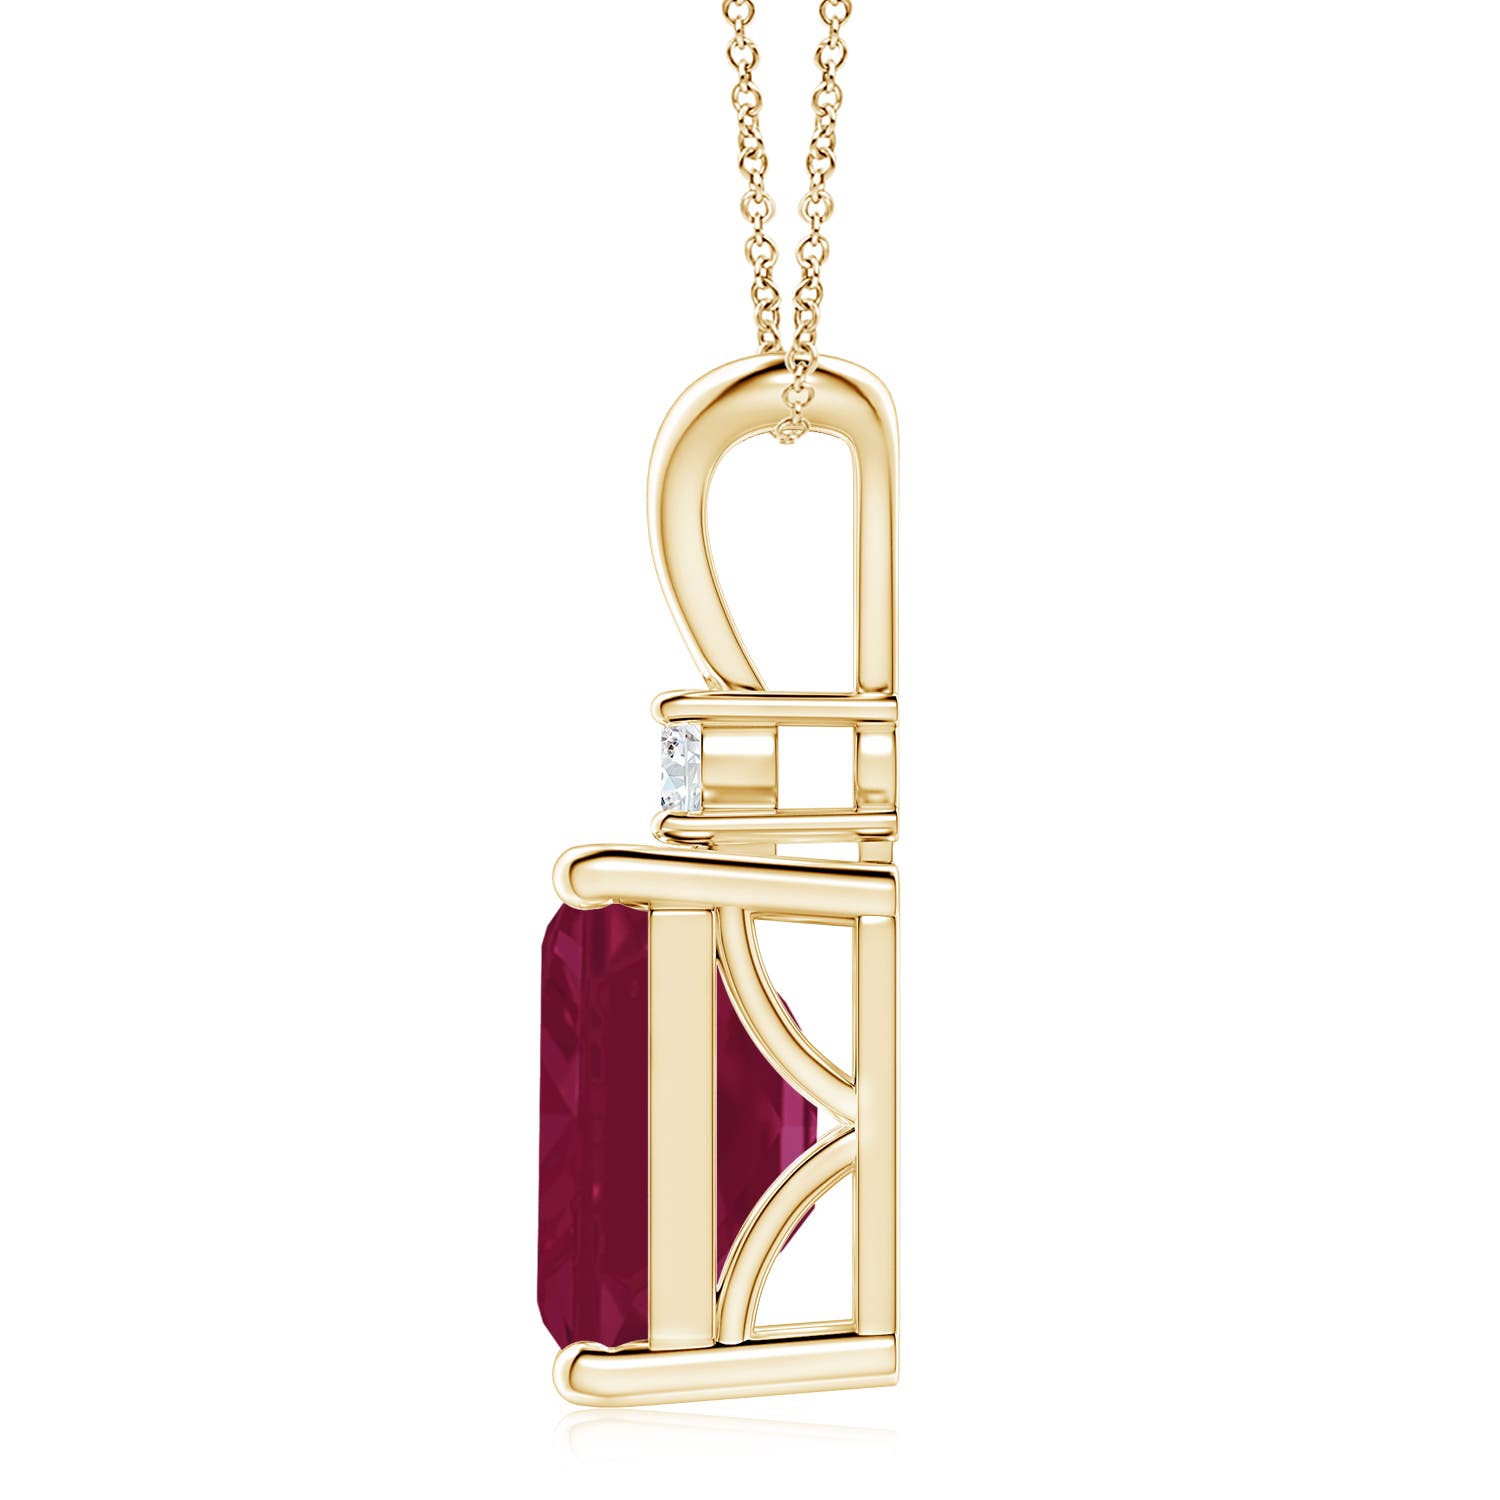 A - Ruby / 6.41 CT / 14 KT Yellow Gold